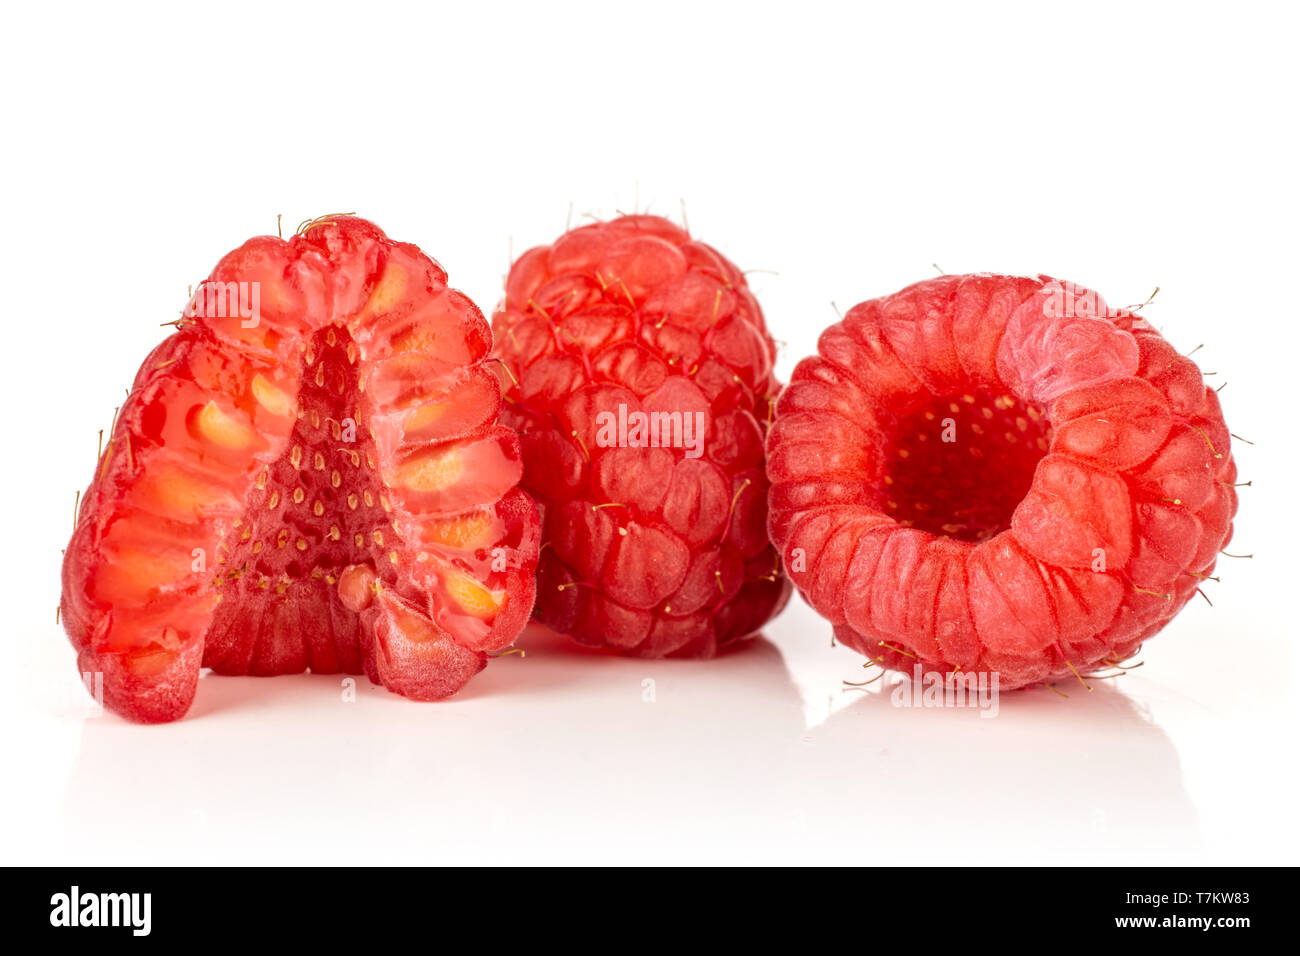 Group of two whole one half of fresh red raspberry cross section isolated on white background Stock Photo